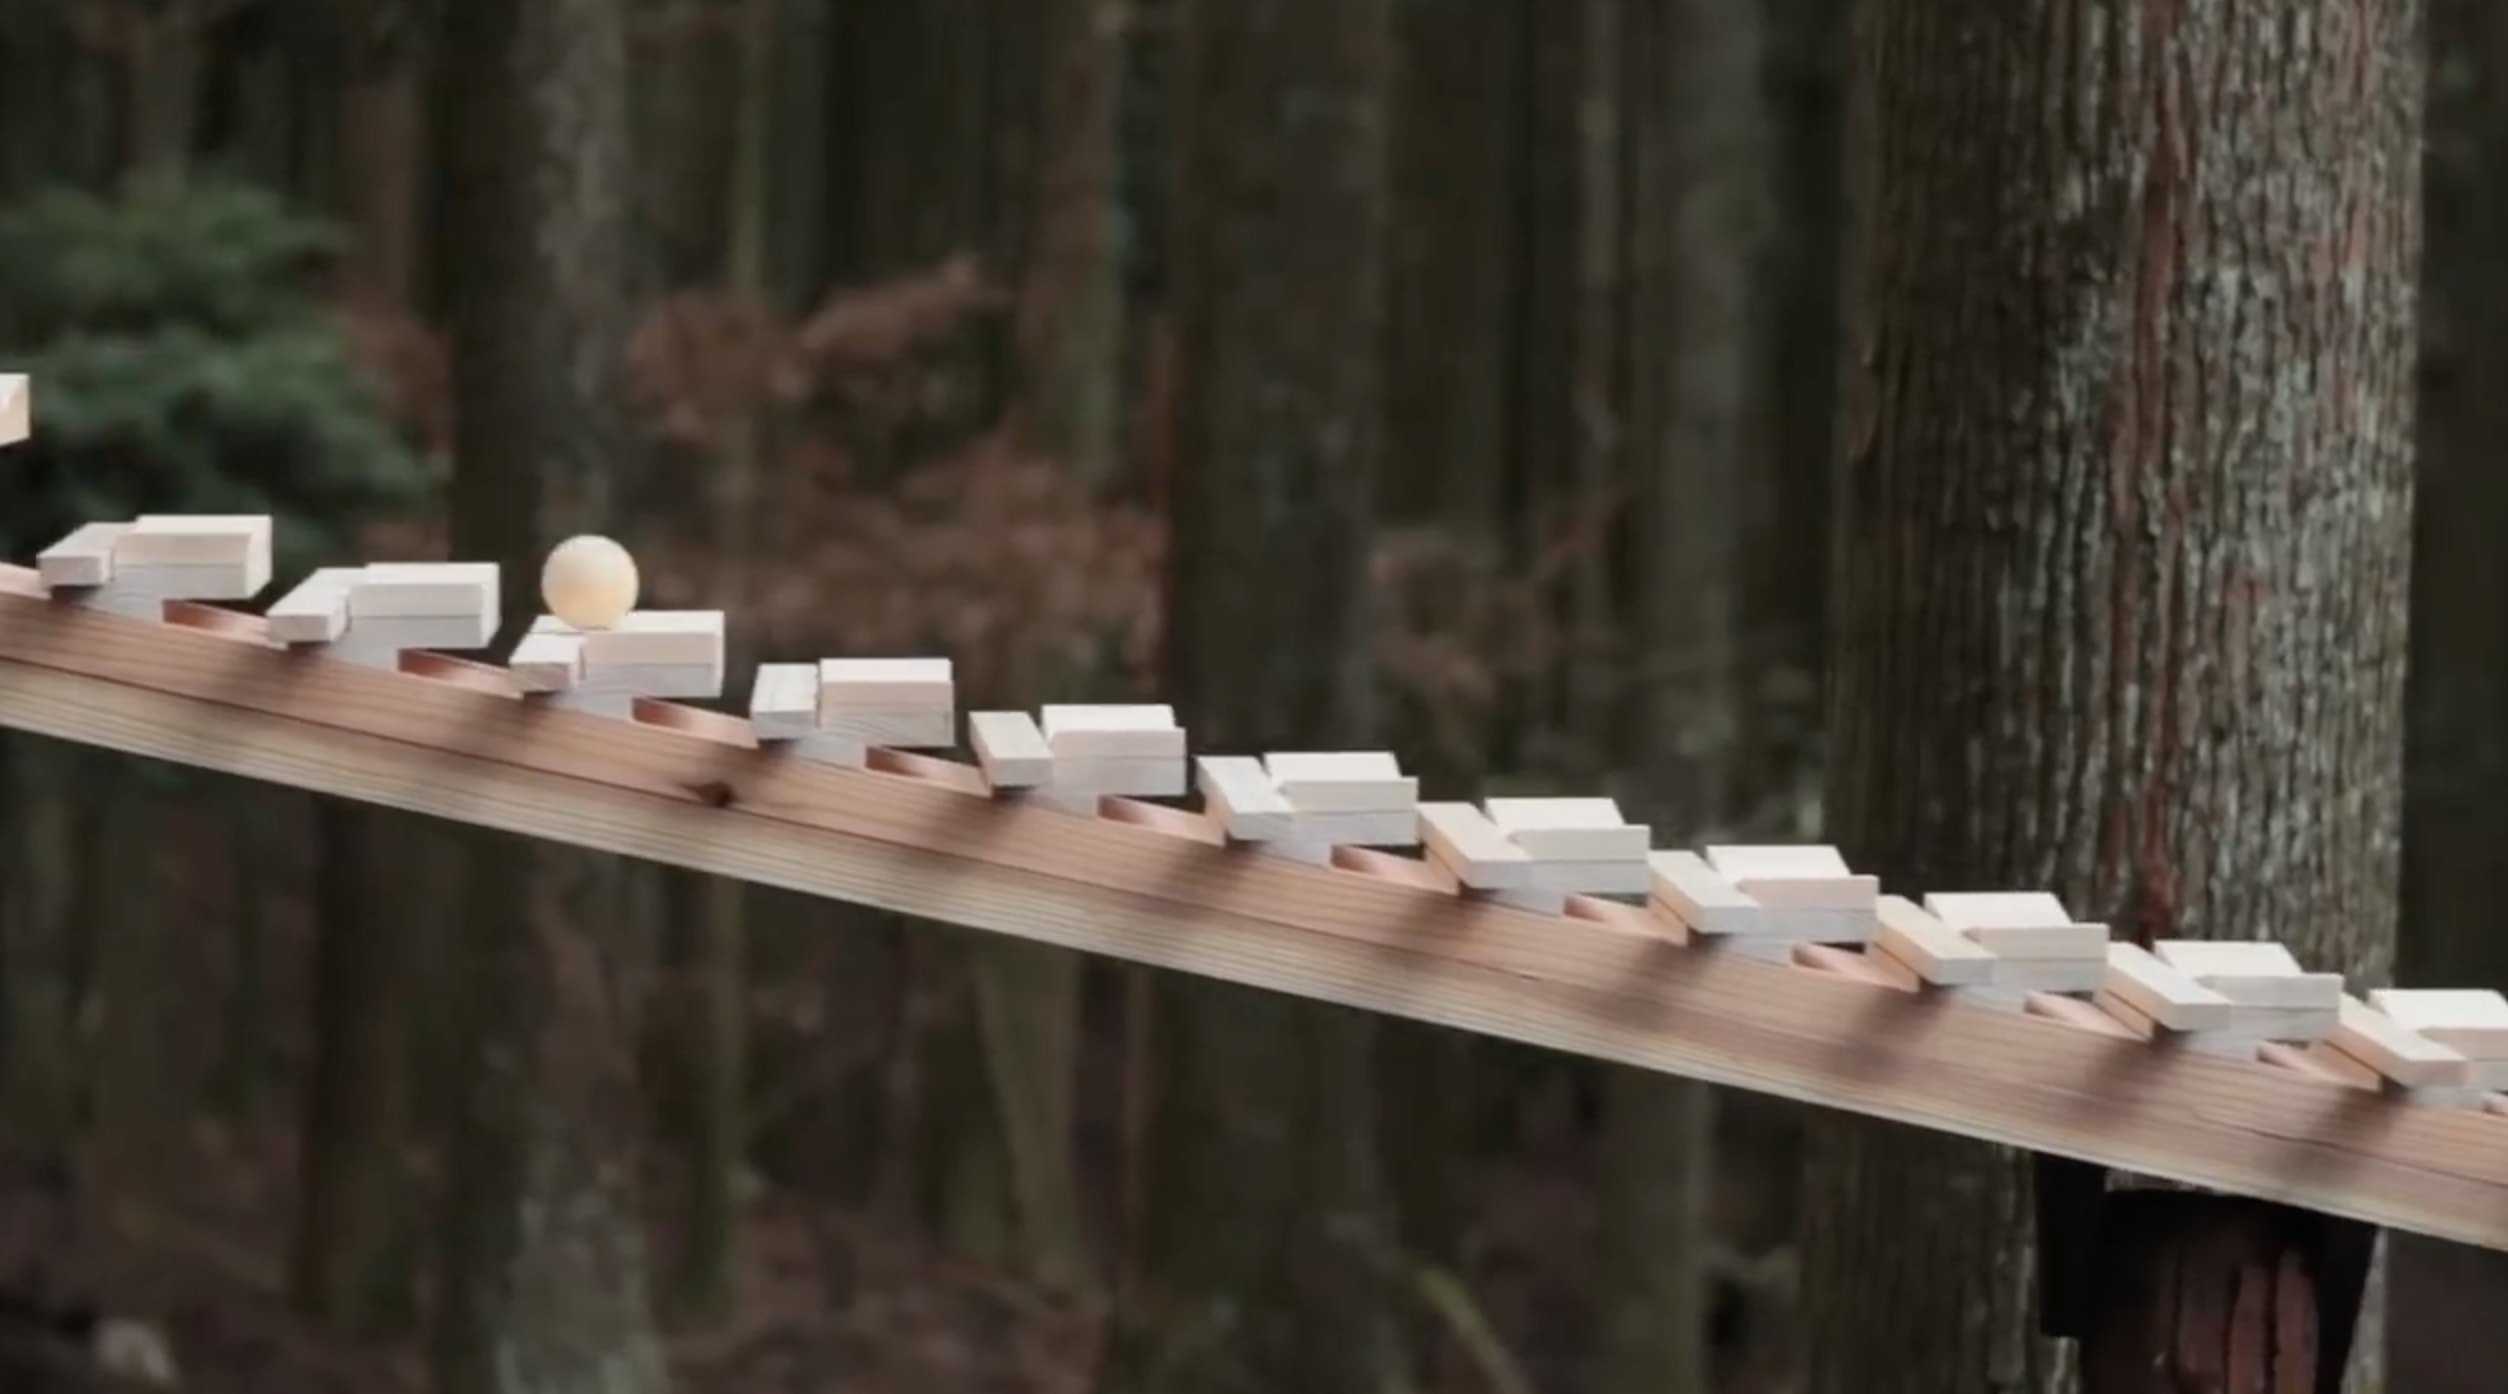 Wooden blocks set up in a forest to create a massive xylophone 